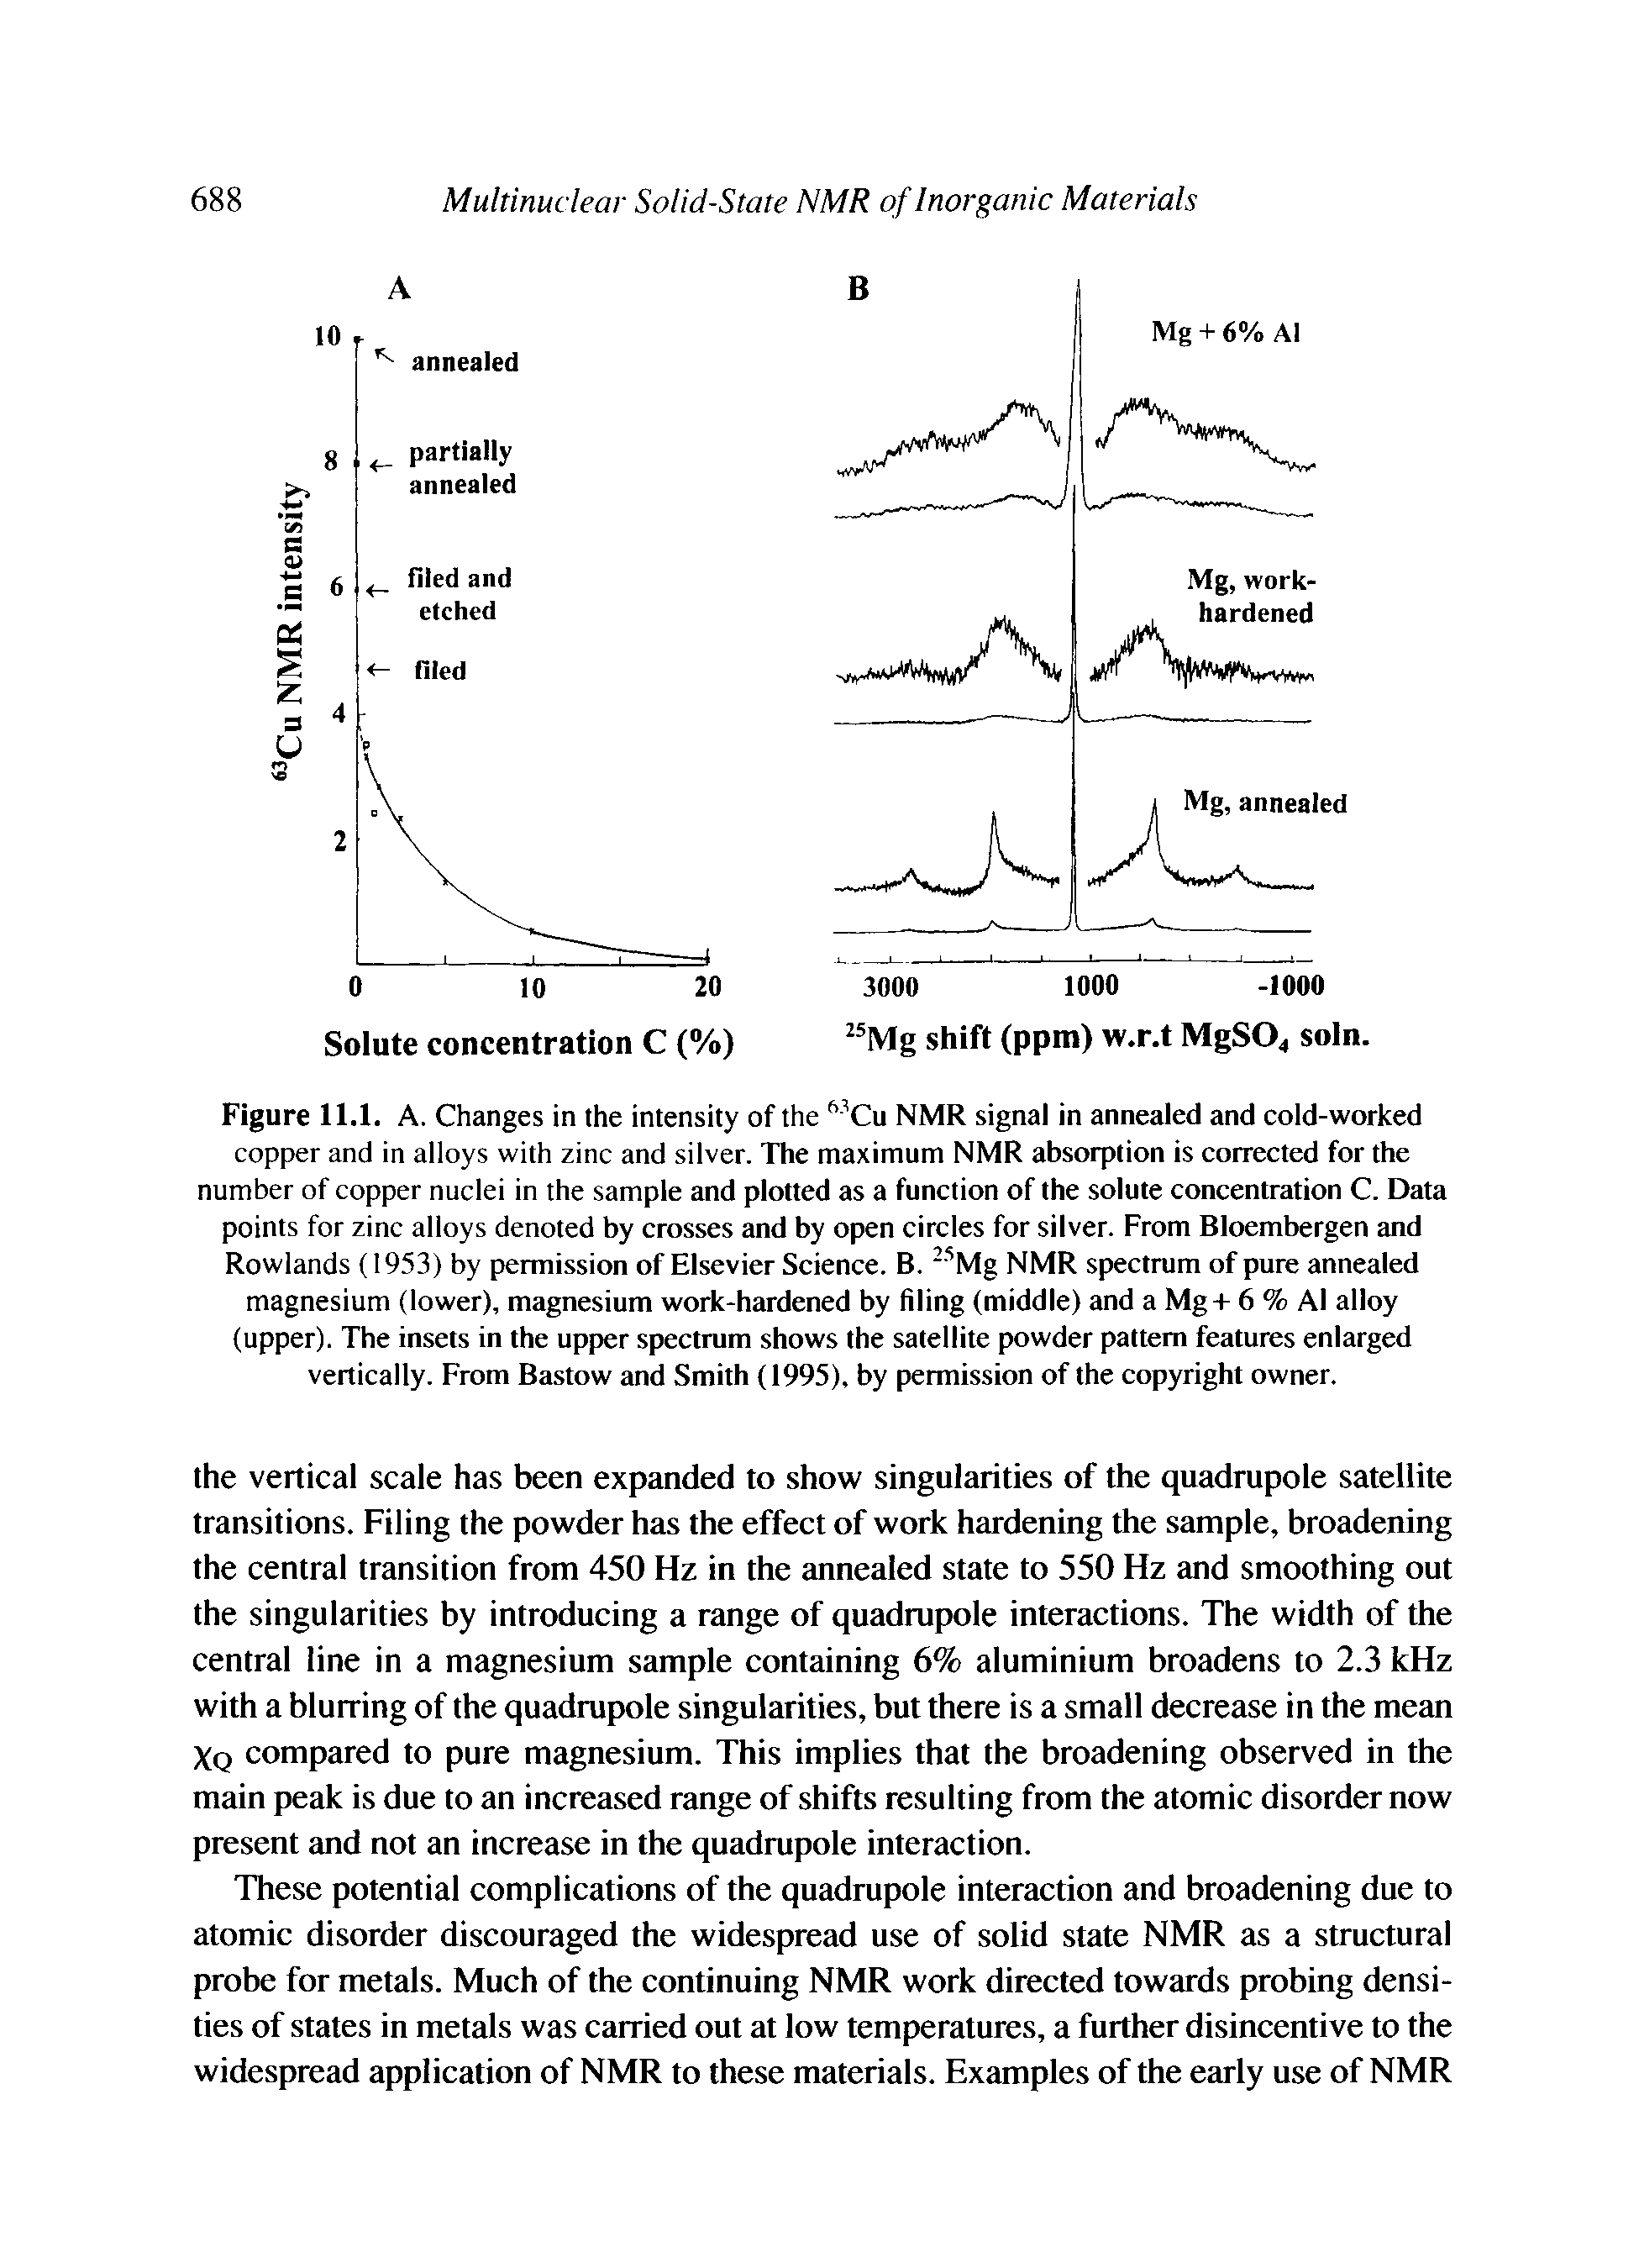 Figure 11.1. A. Changes in the intensity of the Cu NMR signal in annealed and cold-worked copper and in alloys with zinc and silver. The maximum NMR absorption is corrected for the number of copper nuclei in the sample and plotted as a function of the solute concentration C. Data points for zinc alloys denoted by crosses and by open circles for silver. From Bloembergen and Rowlands (1953) by permission of Elsevier Science. B. " Mg NMR spectrum of pure annealed magnesium (lower), magnesium work-hardened by filing (middle) and a Mg+ 6 % Al alloy (upper). The insets in the upper spectrum shows the satellite powder pattern features enlarged vertically. From Bastow and Smith (1995), by permission of the copyright owner.